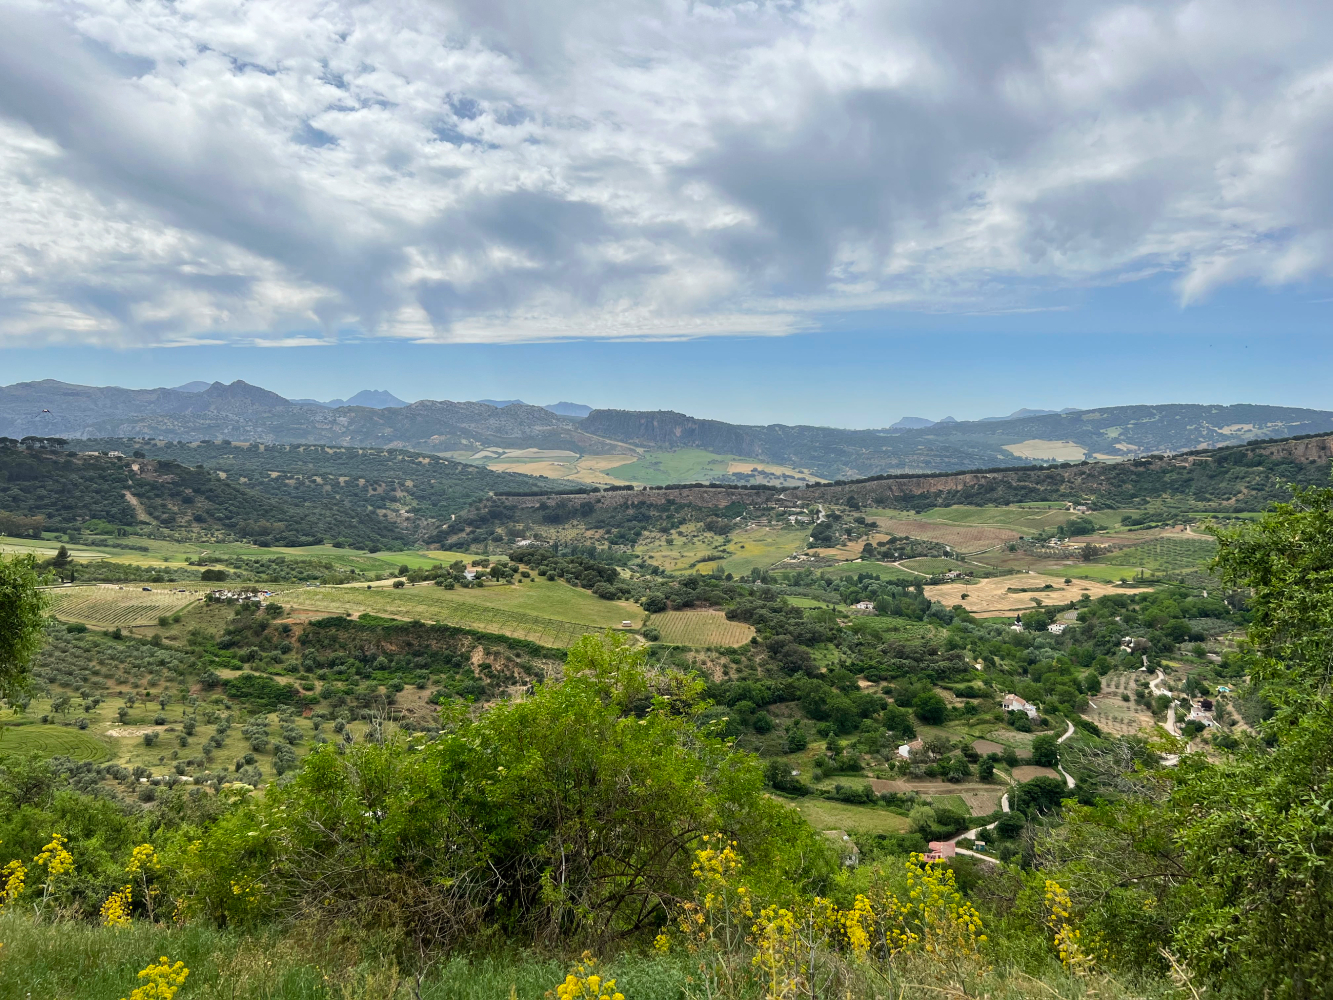 Guadalevín River Valley, Ronda, Andalusia, Spain